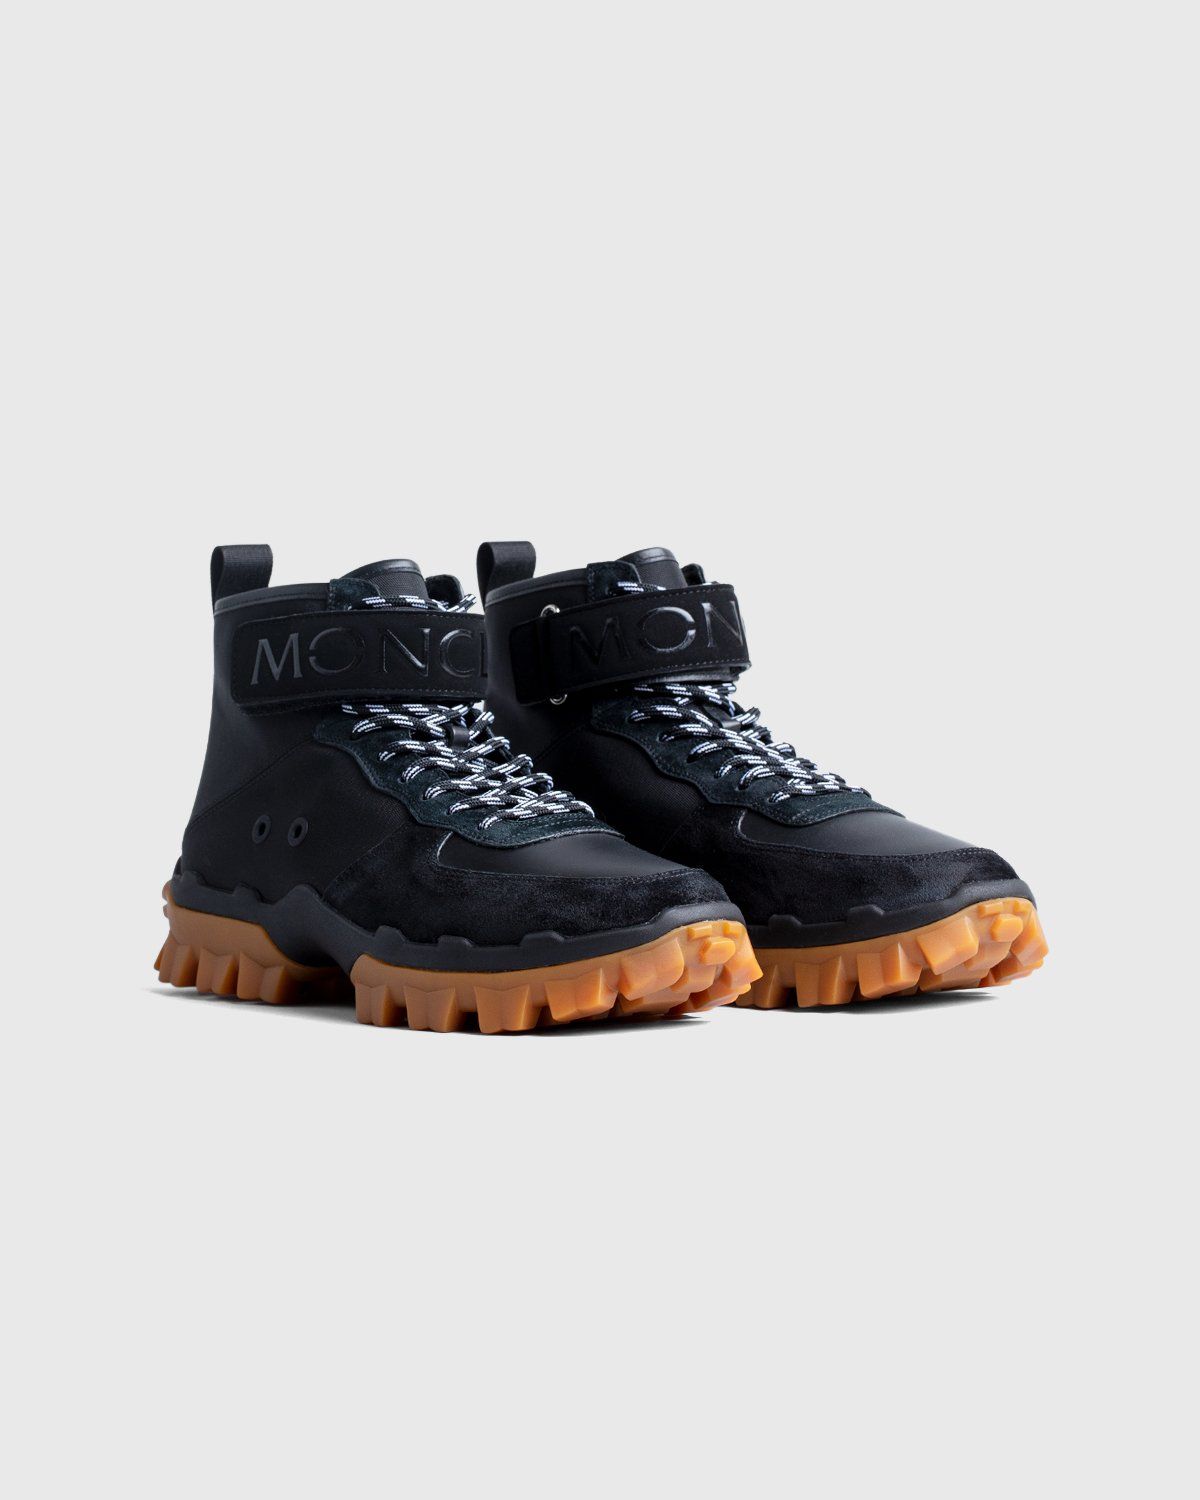 Moncler Genius – Recycled Hugo Shoes - Shoes - Black - Image 3